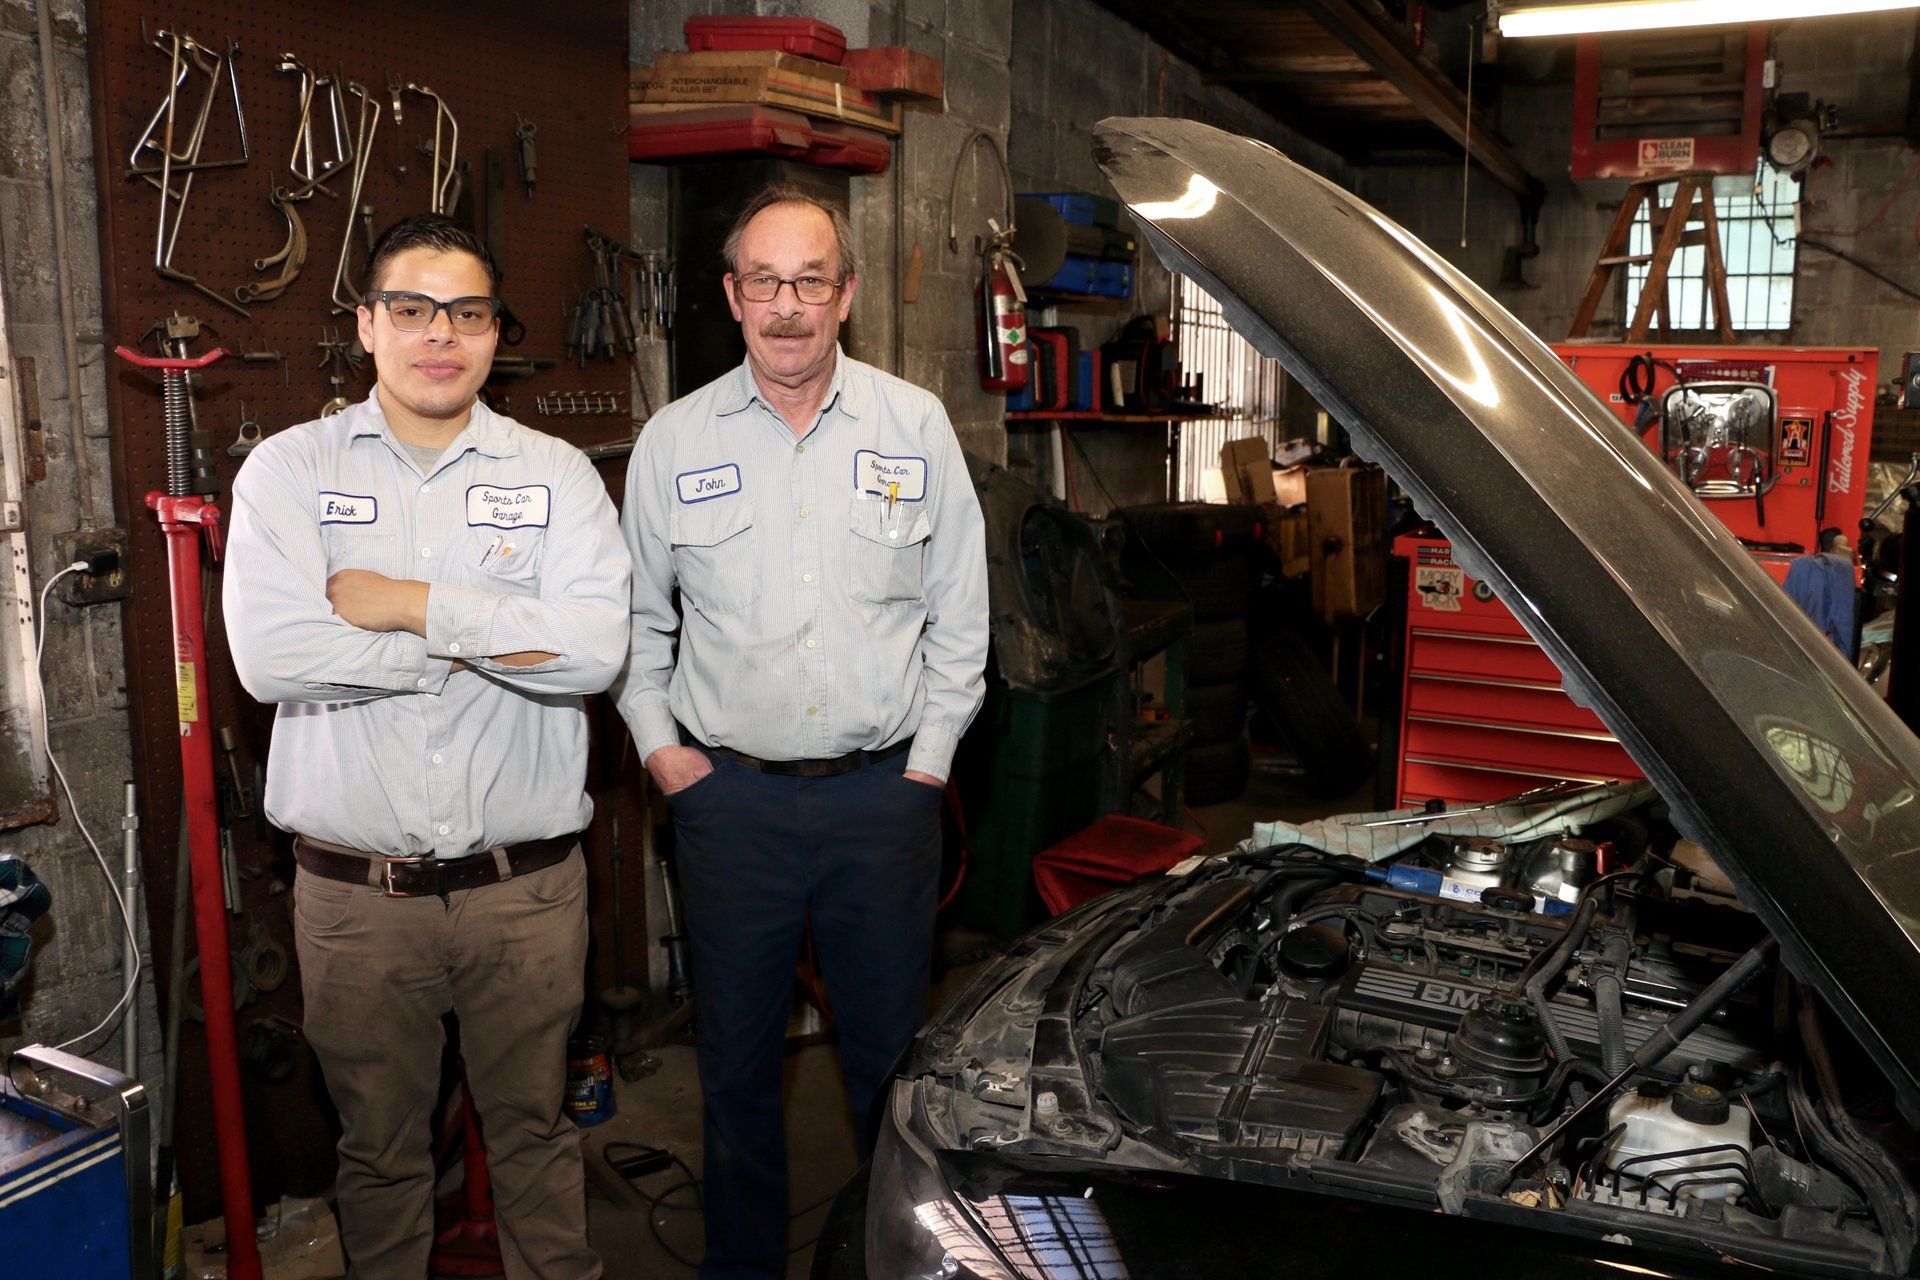 The dream team, John and Erick, are experts with foreign cars